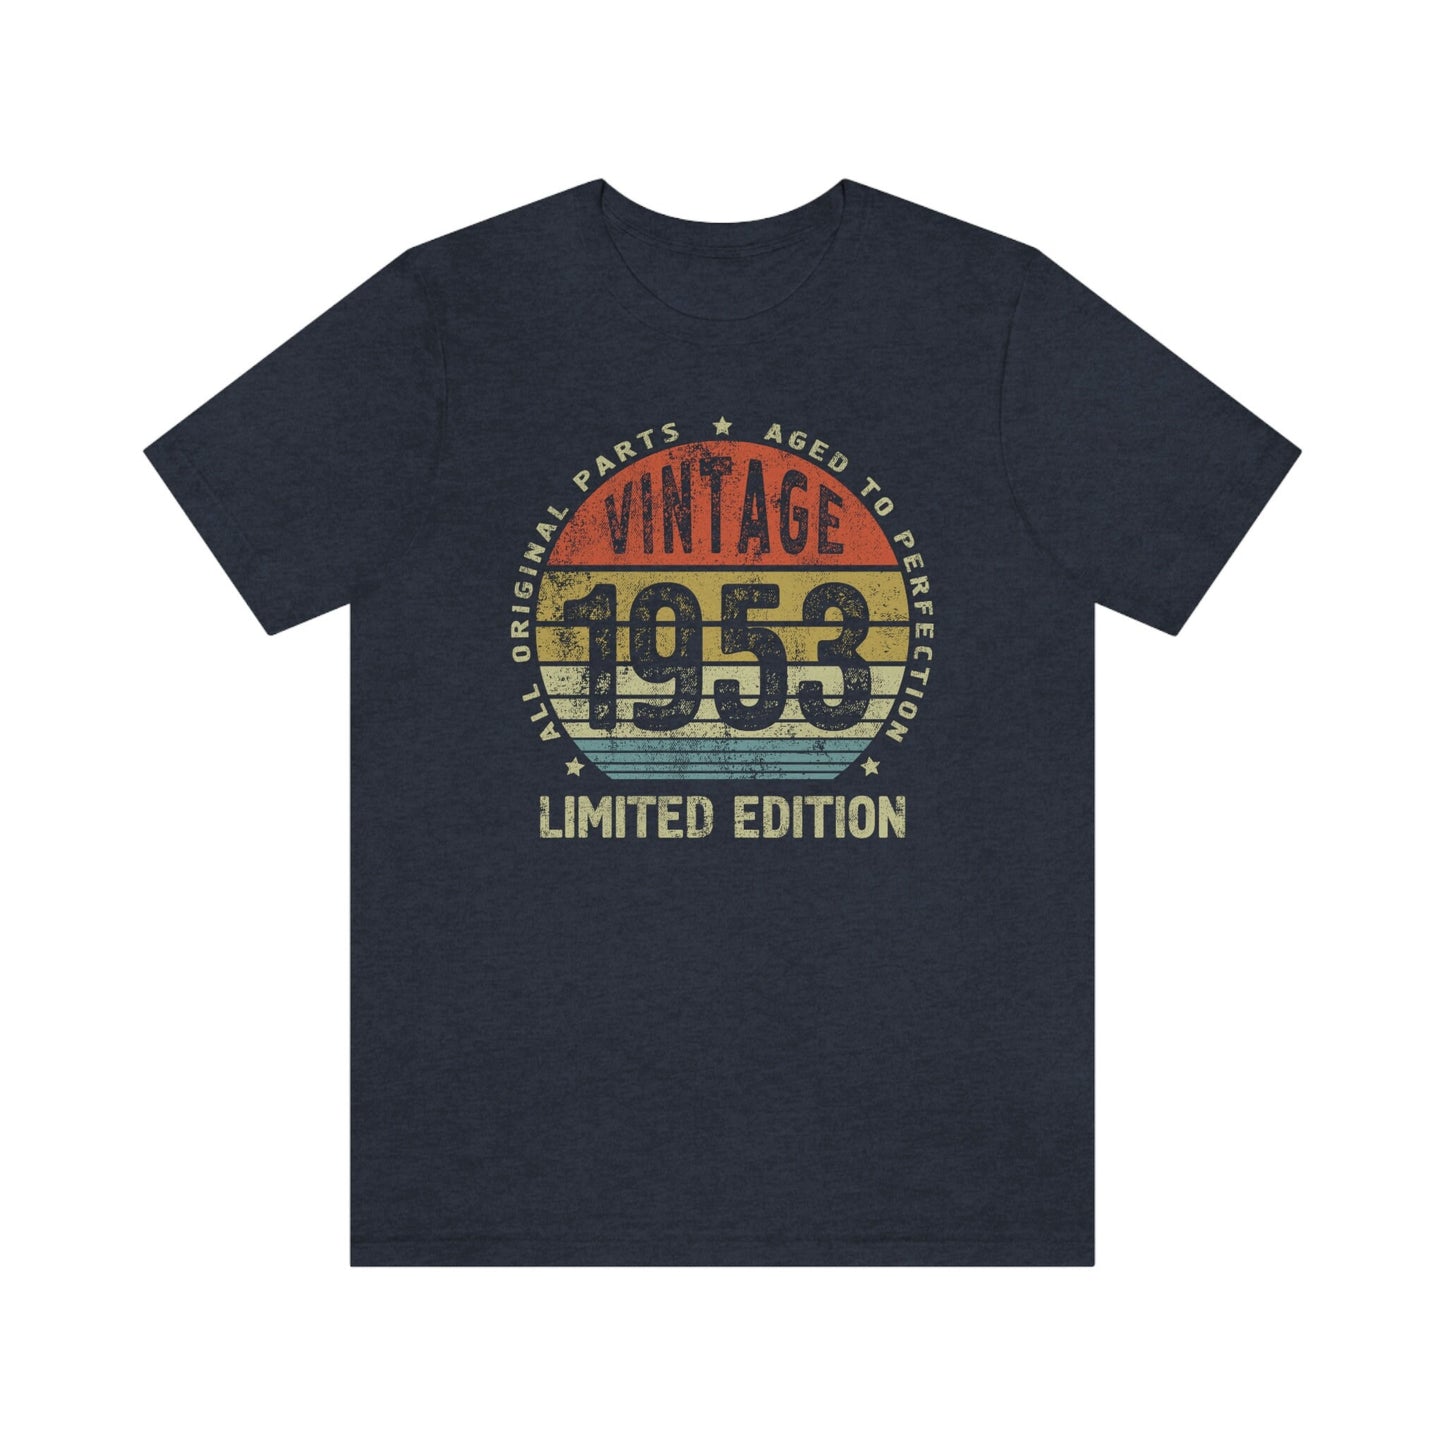 Vintage 1953 Birthday Shirt for Women or Men, Gift t-shirt for Wife or Husband